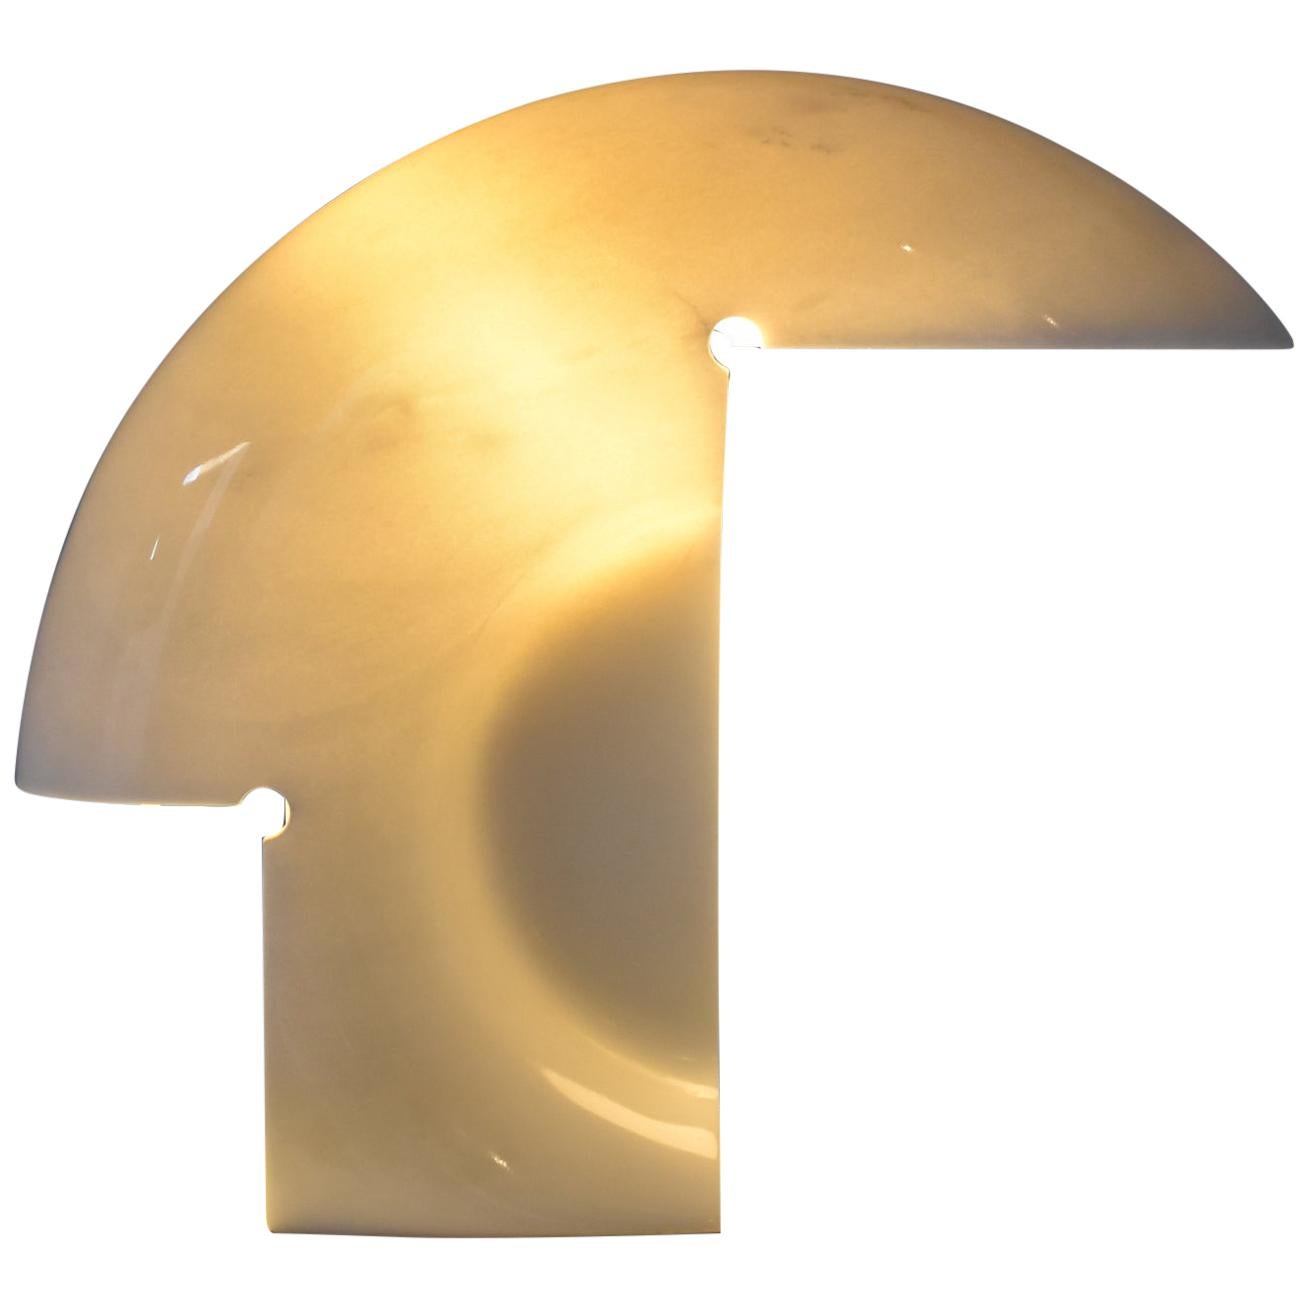 Early Edition of This ‘Biagio’ Table Lamp by Tobia Scarpa for Flos, Italy, 1968